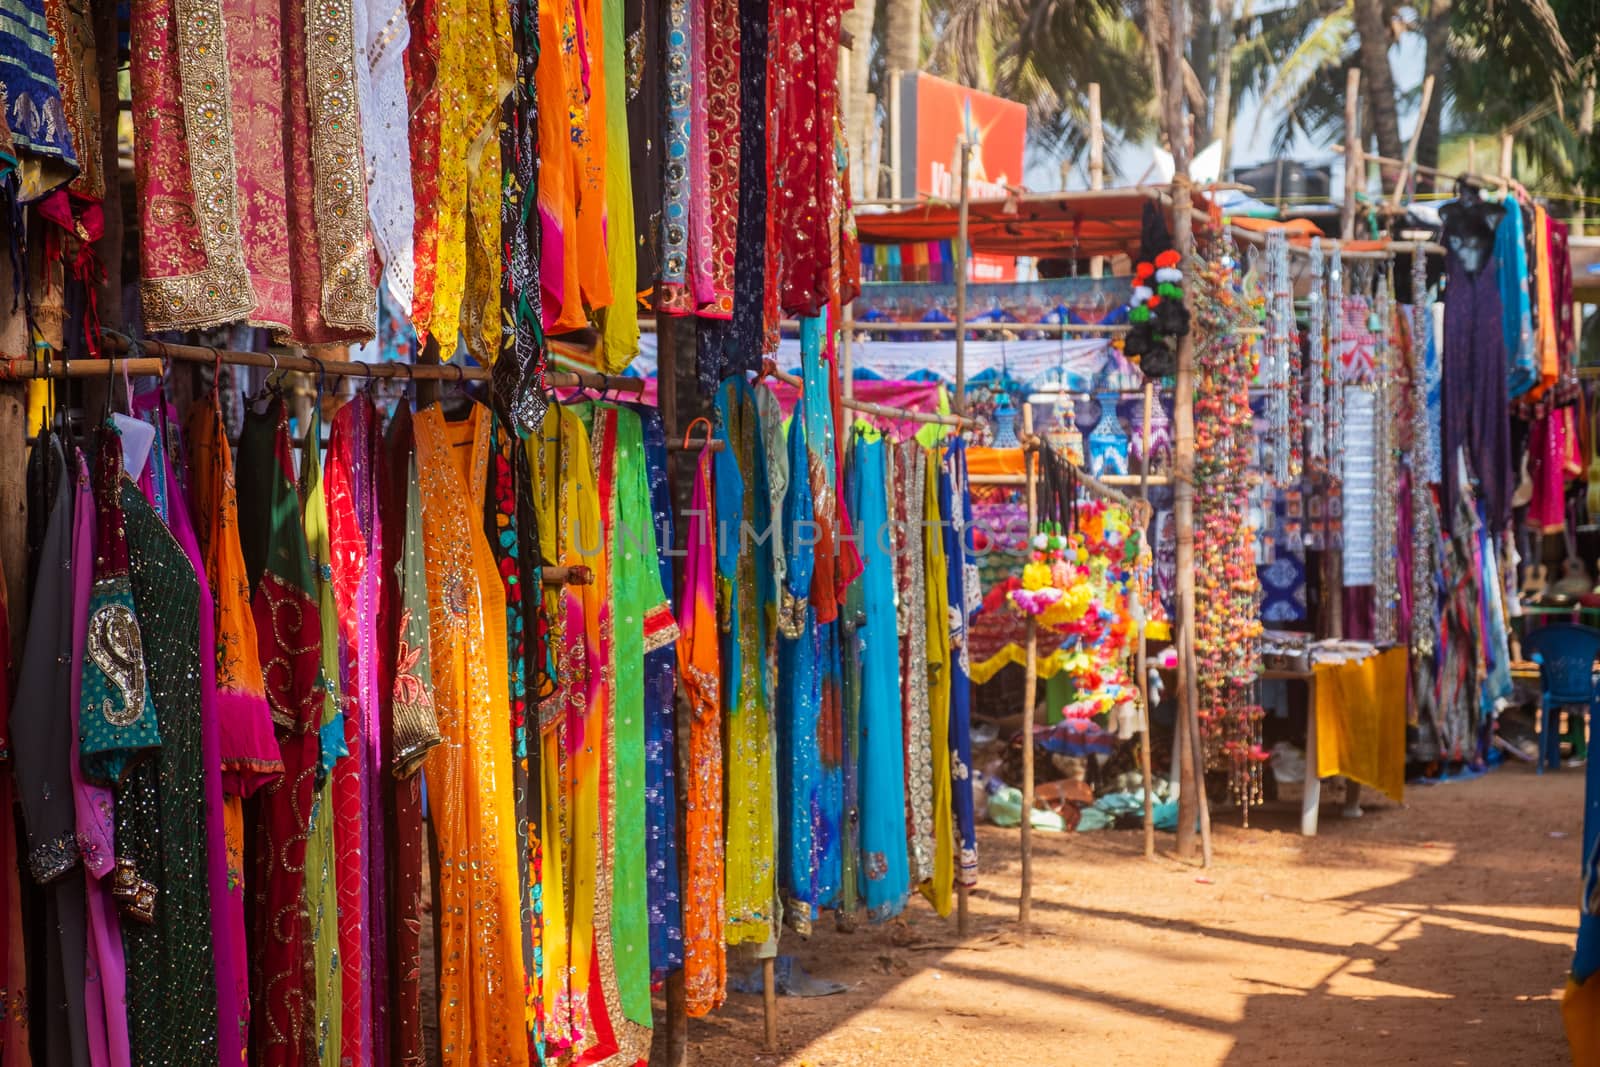 Indian bazaar benches with colorful saris by snep_photo